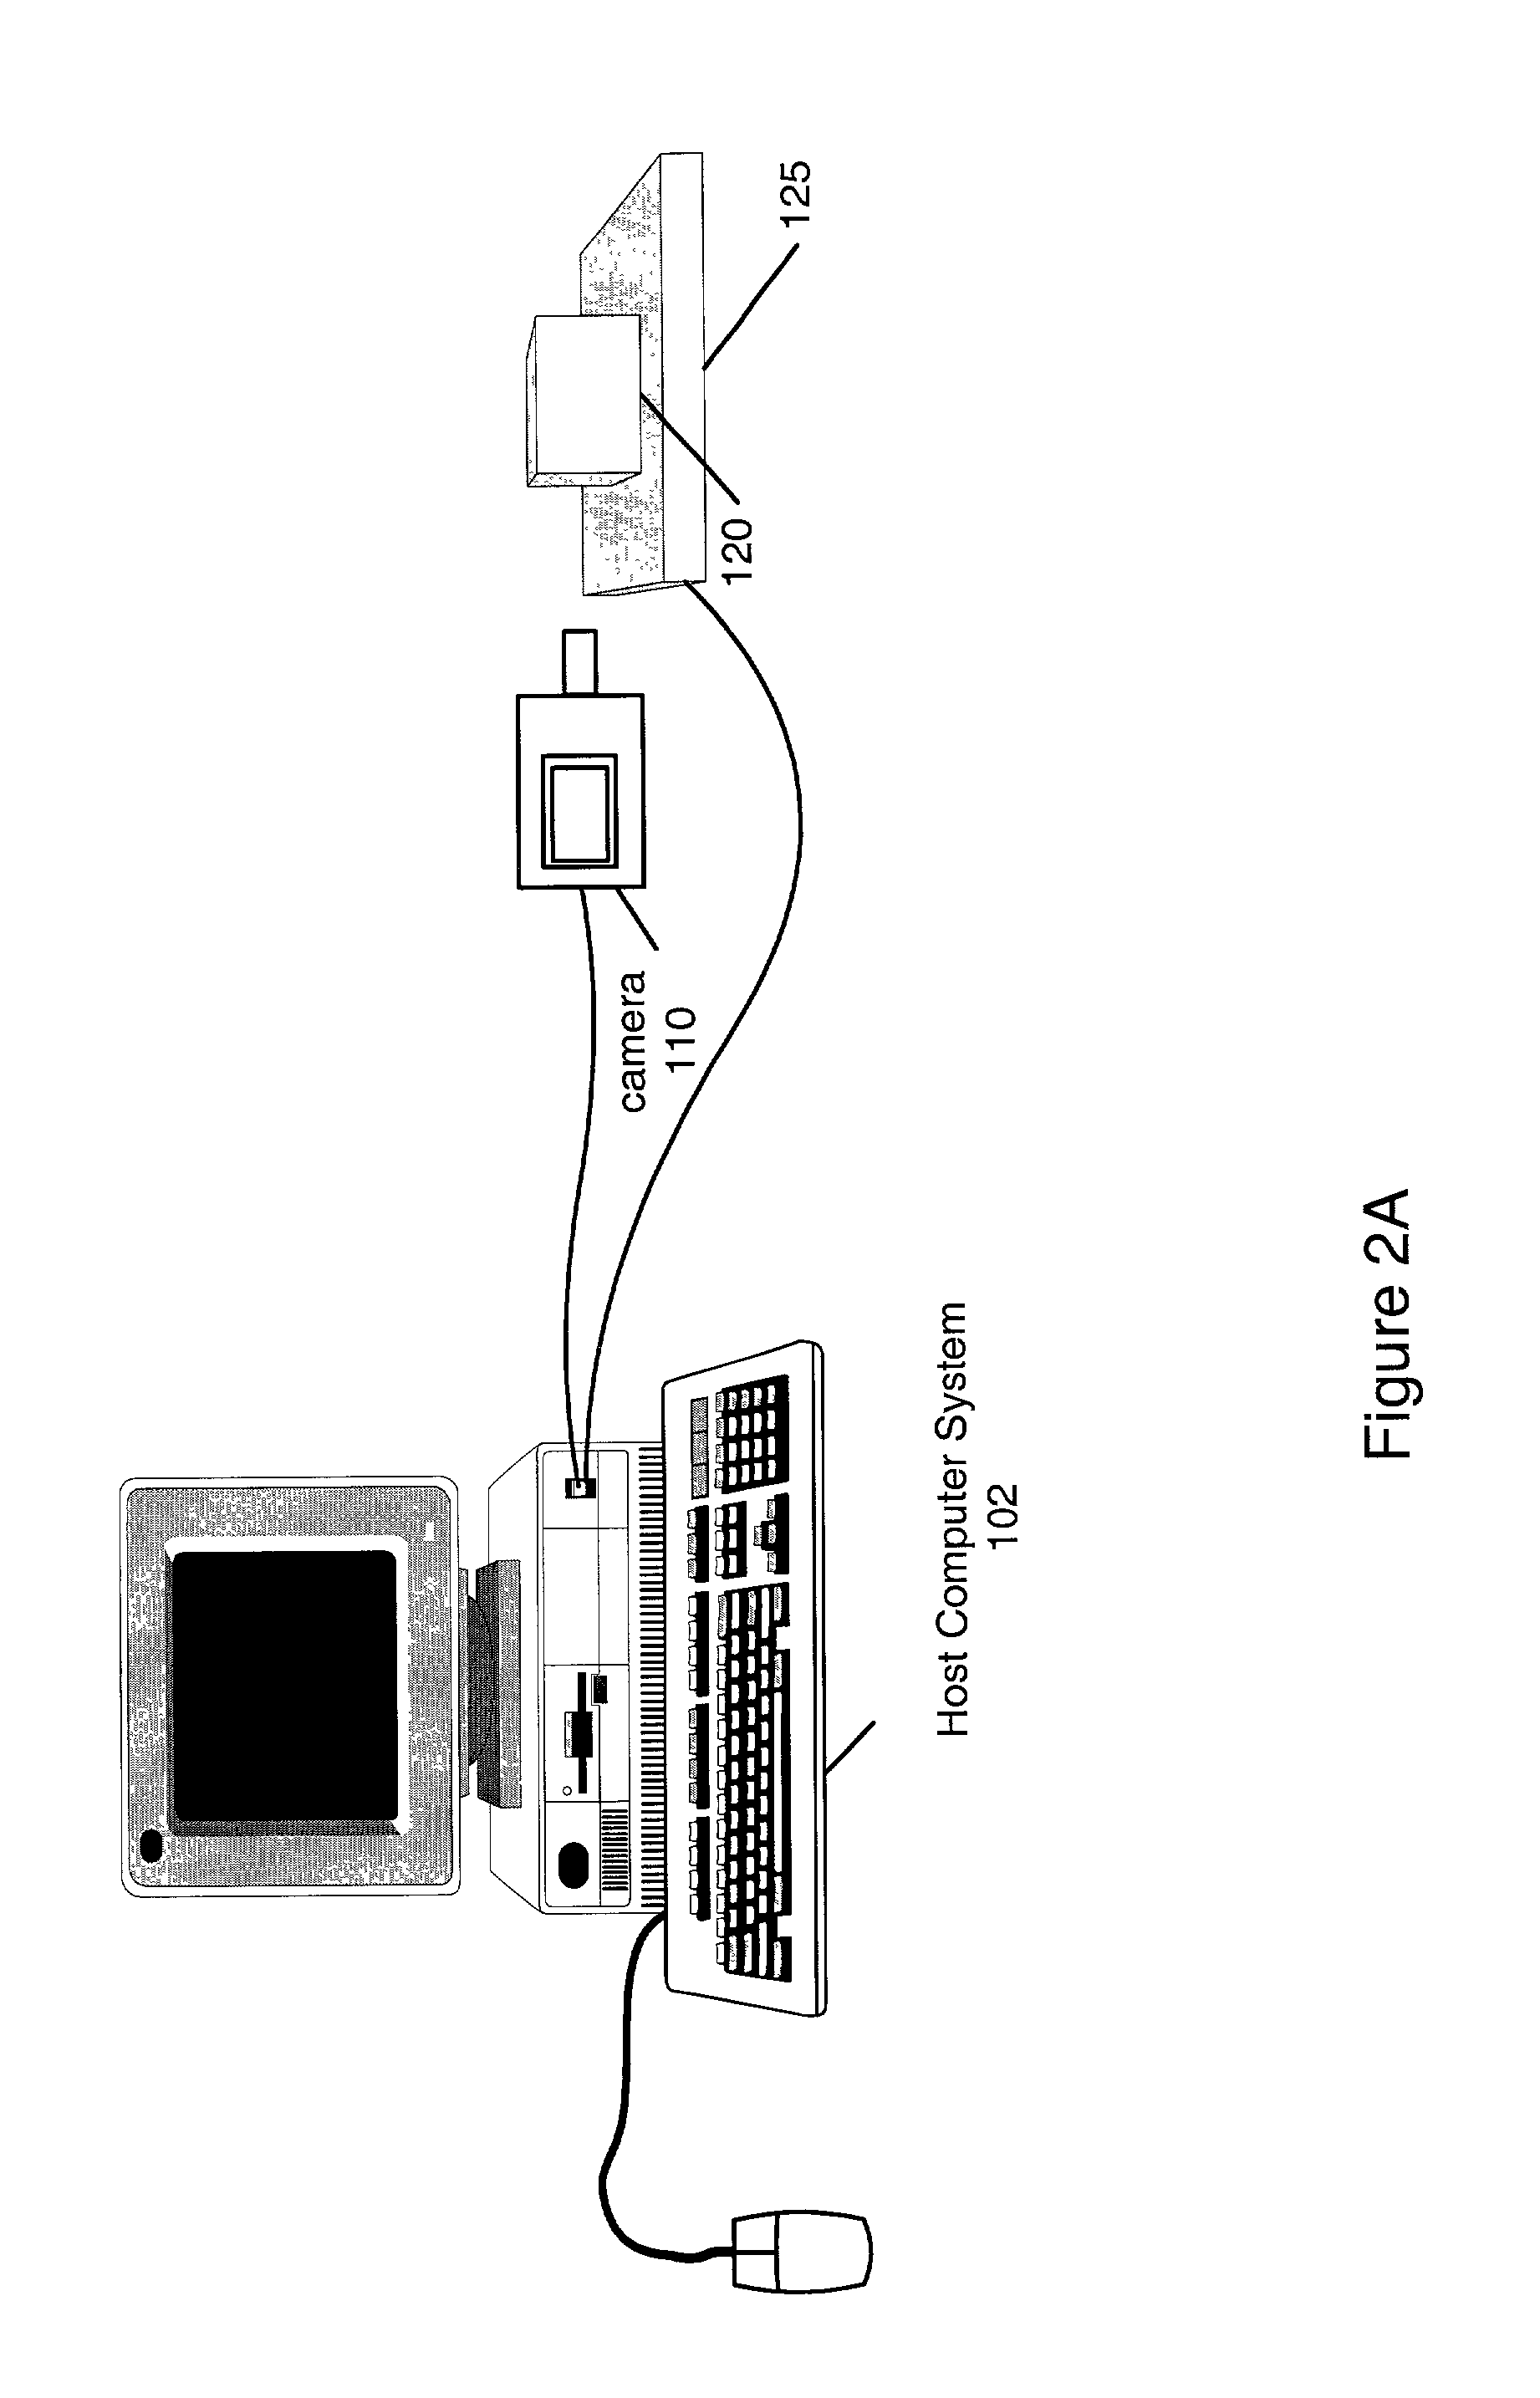 System and method for scanning a region using conformal mapping